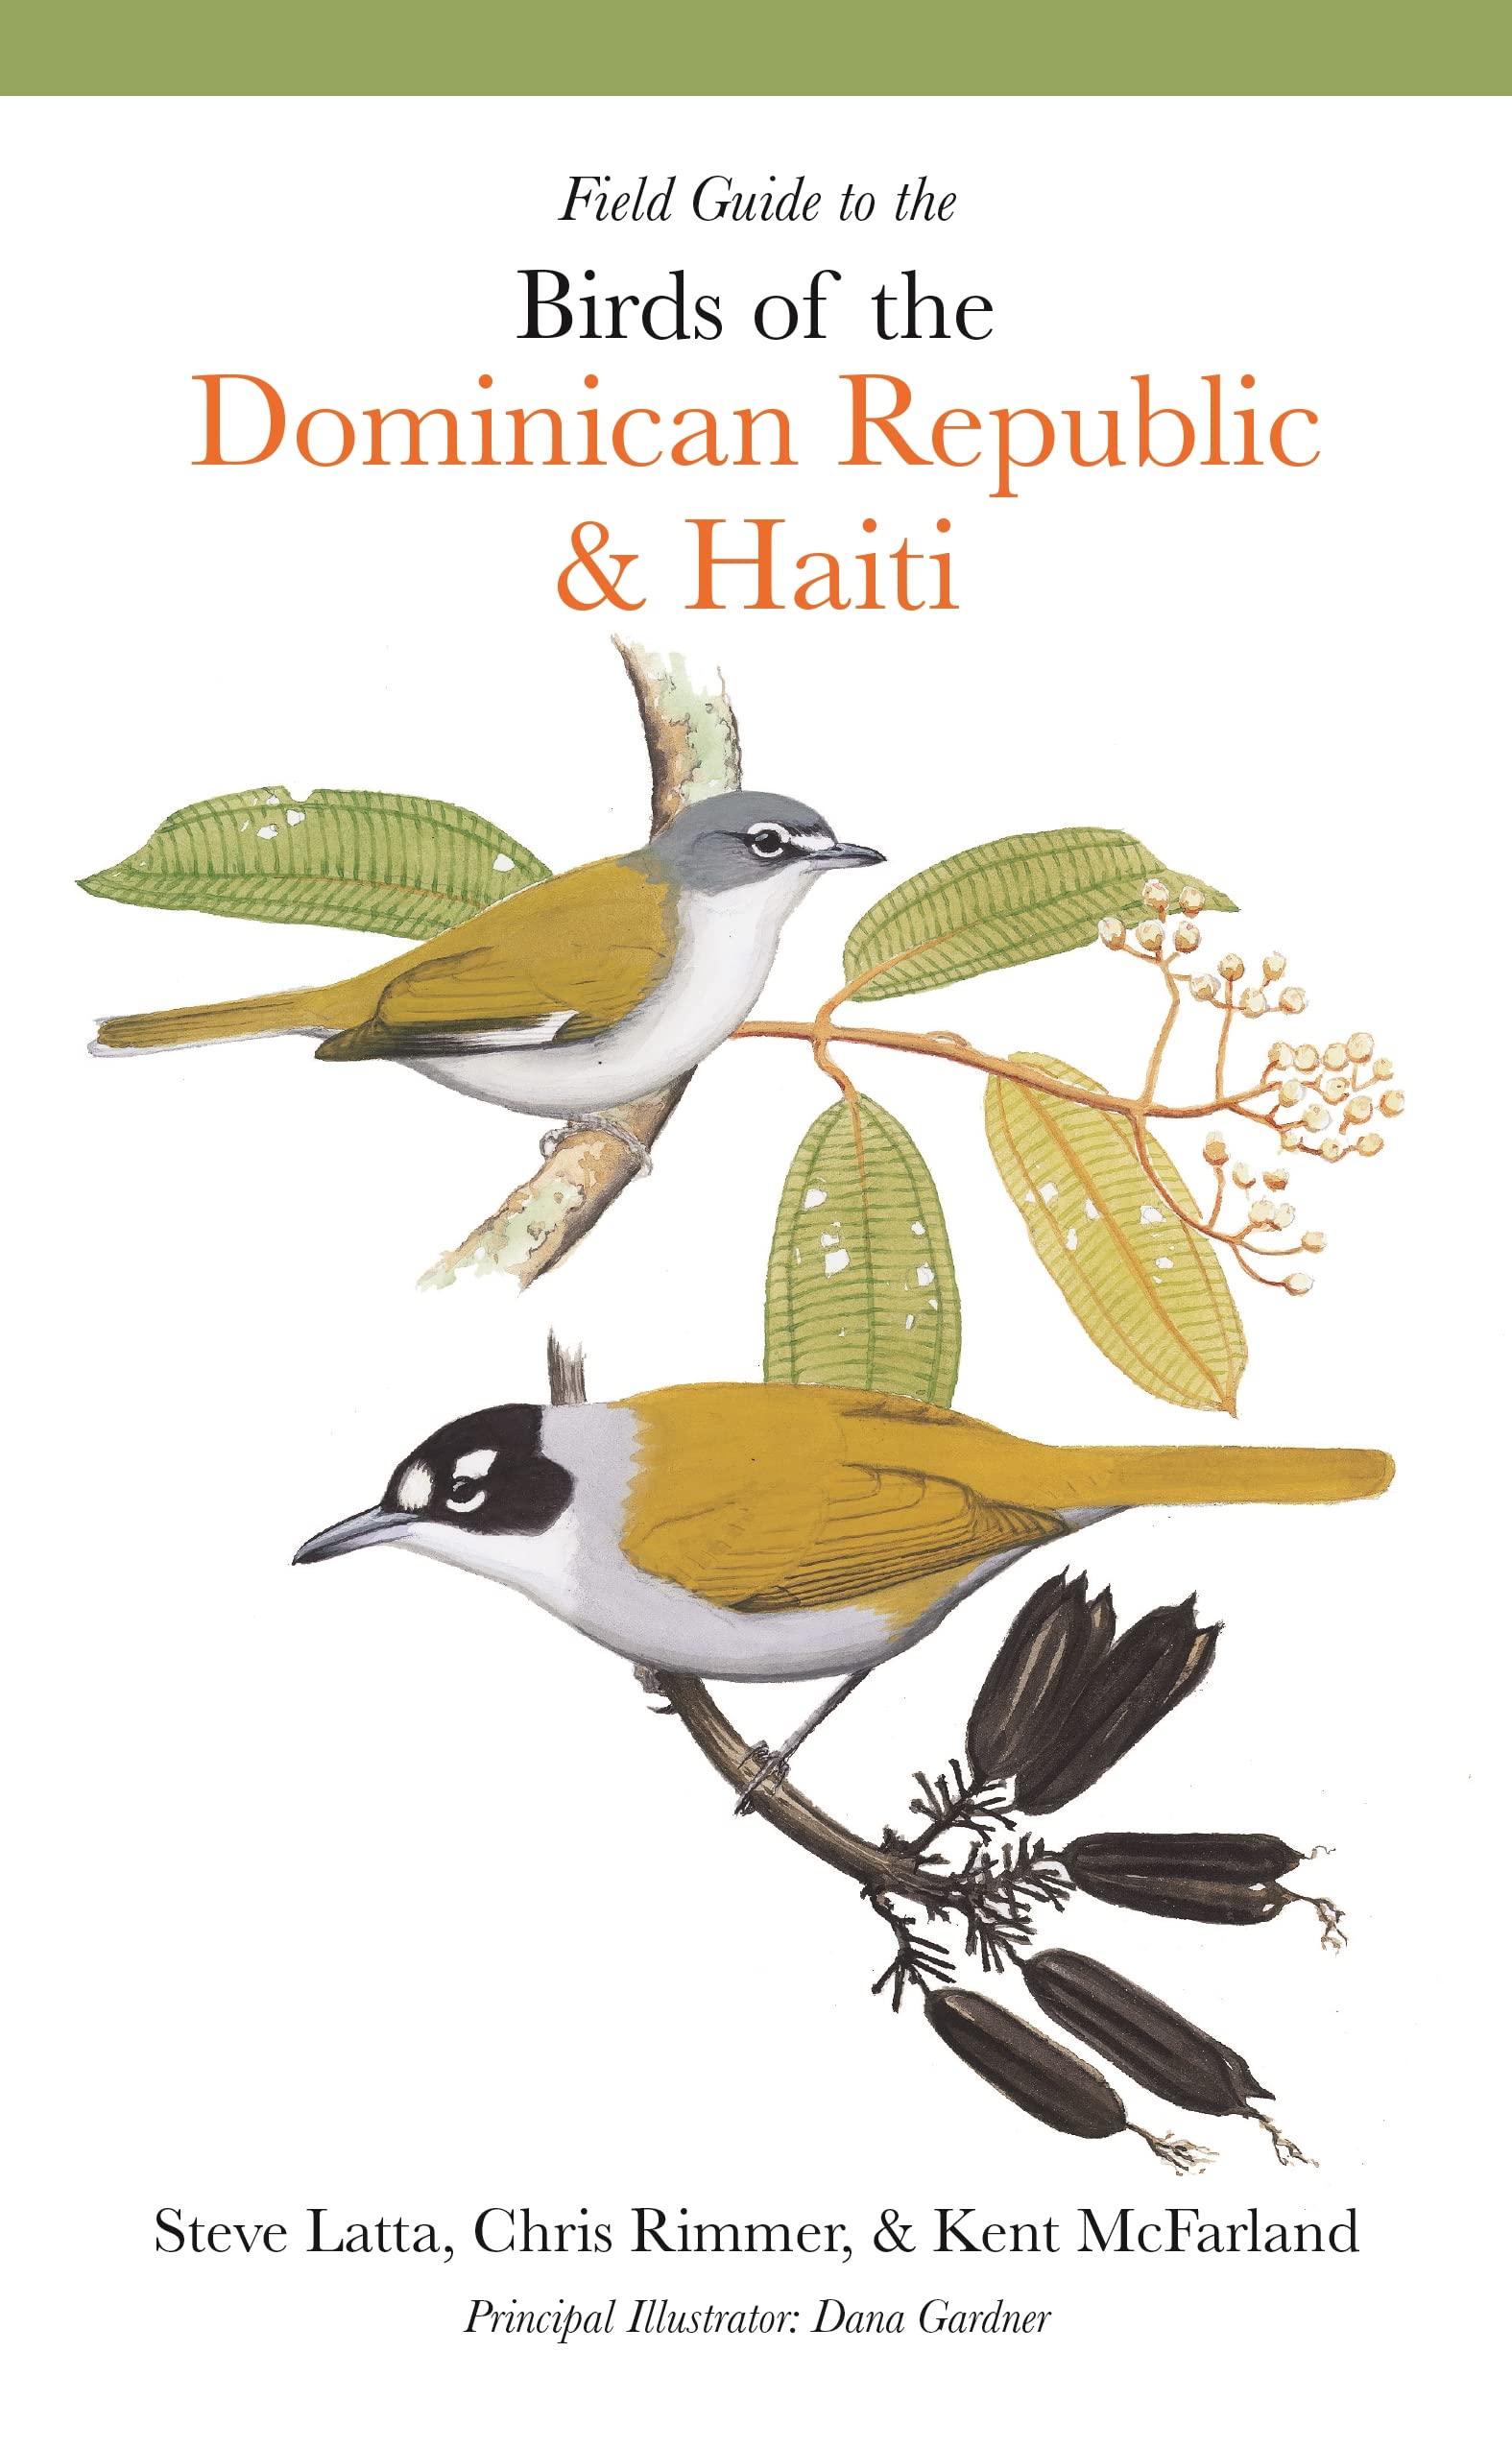 Online bestellen: Vogelgids Field Guide to the Birds of the Dominican Republic and Haiti | Princeton University